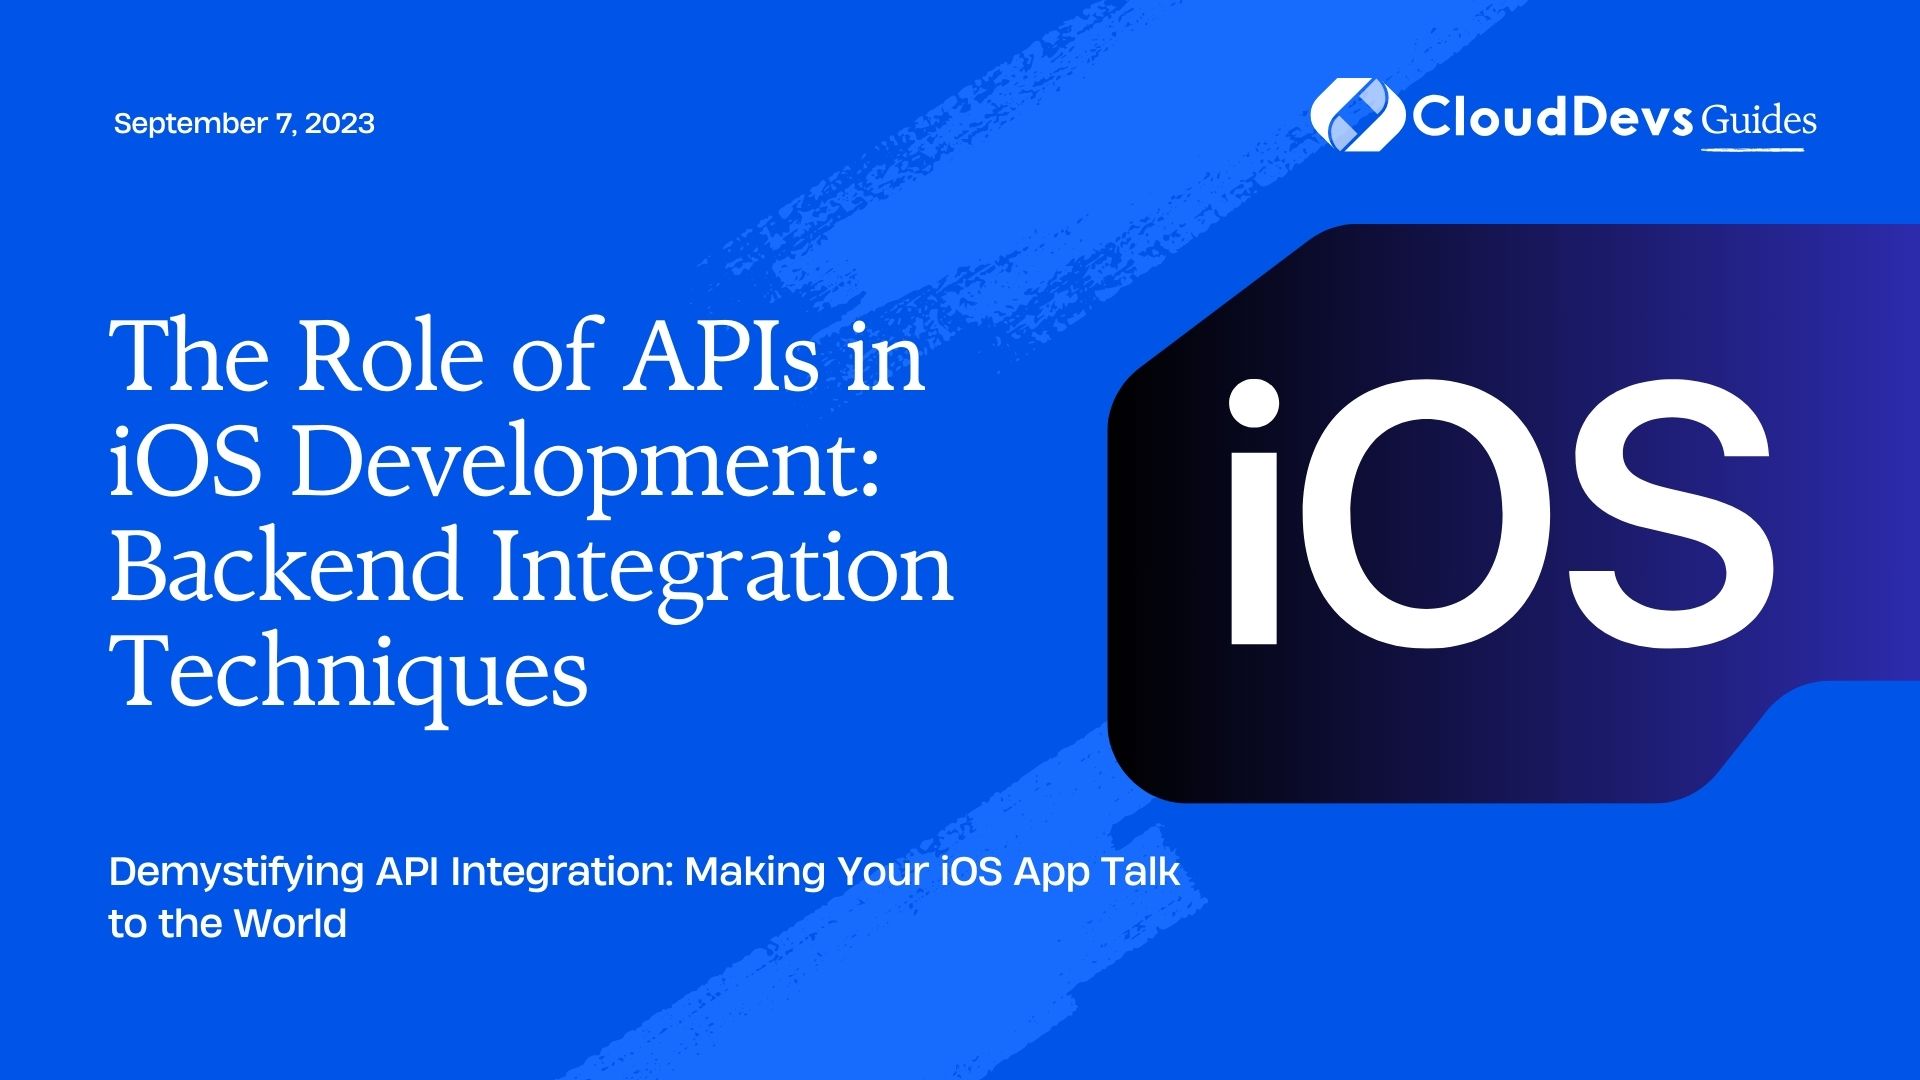 The Role of APIs in iOS Development: Backend Integration Techniques